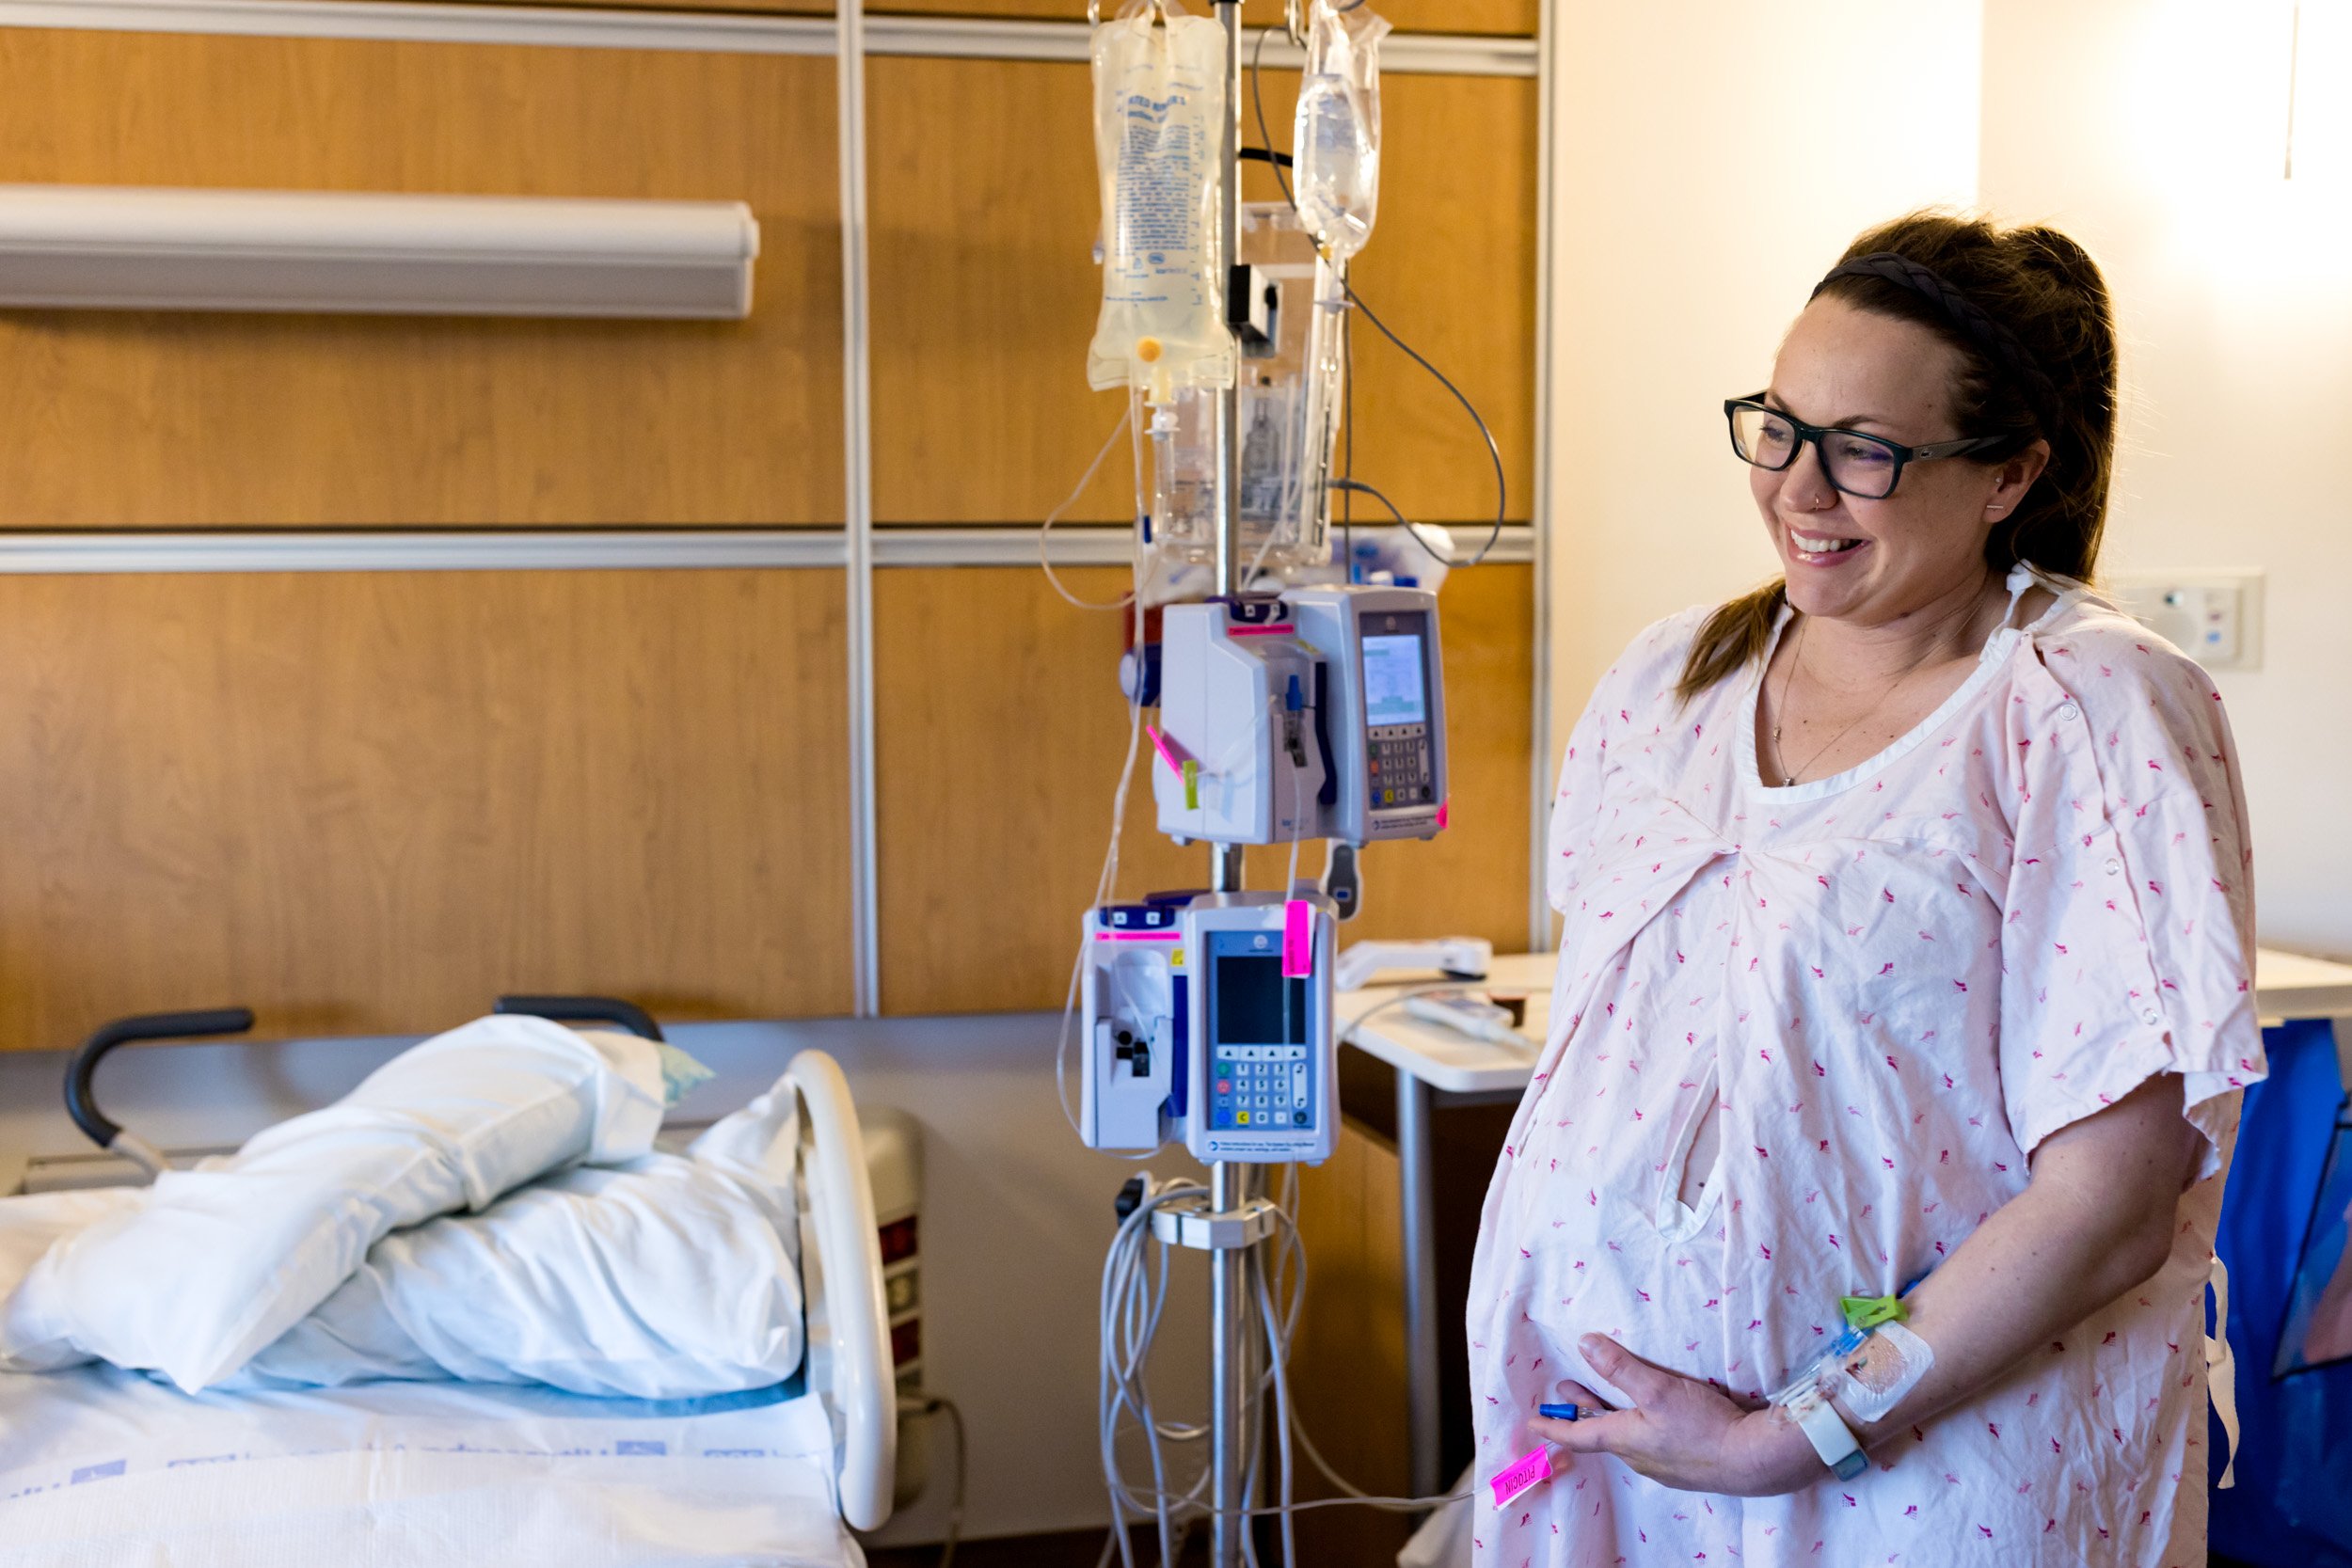 laboring mom smiling in between contractions